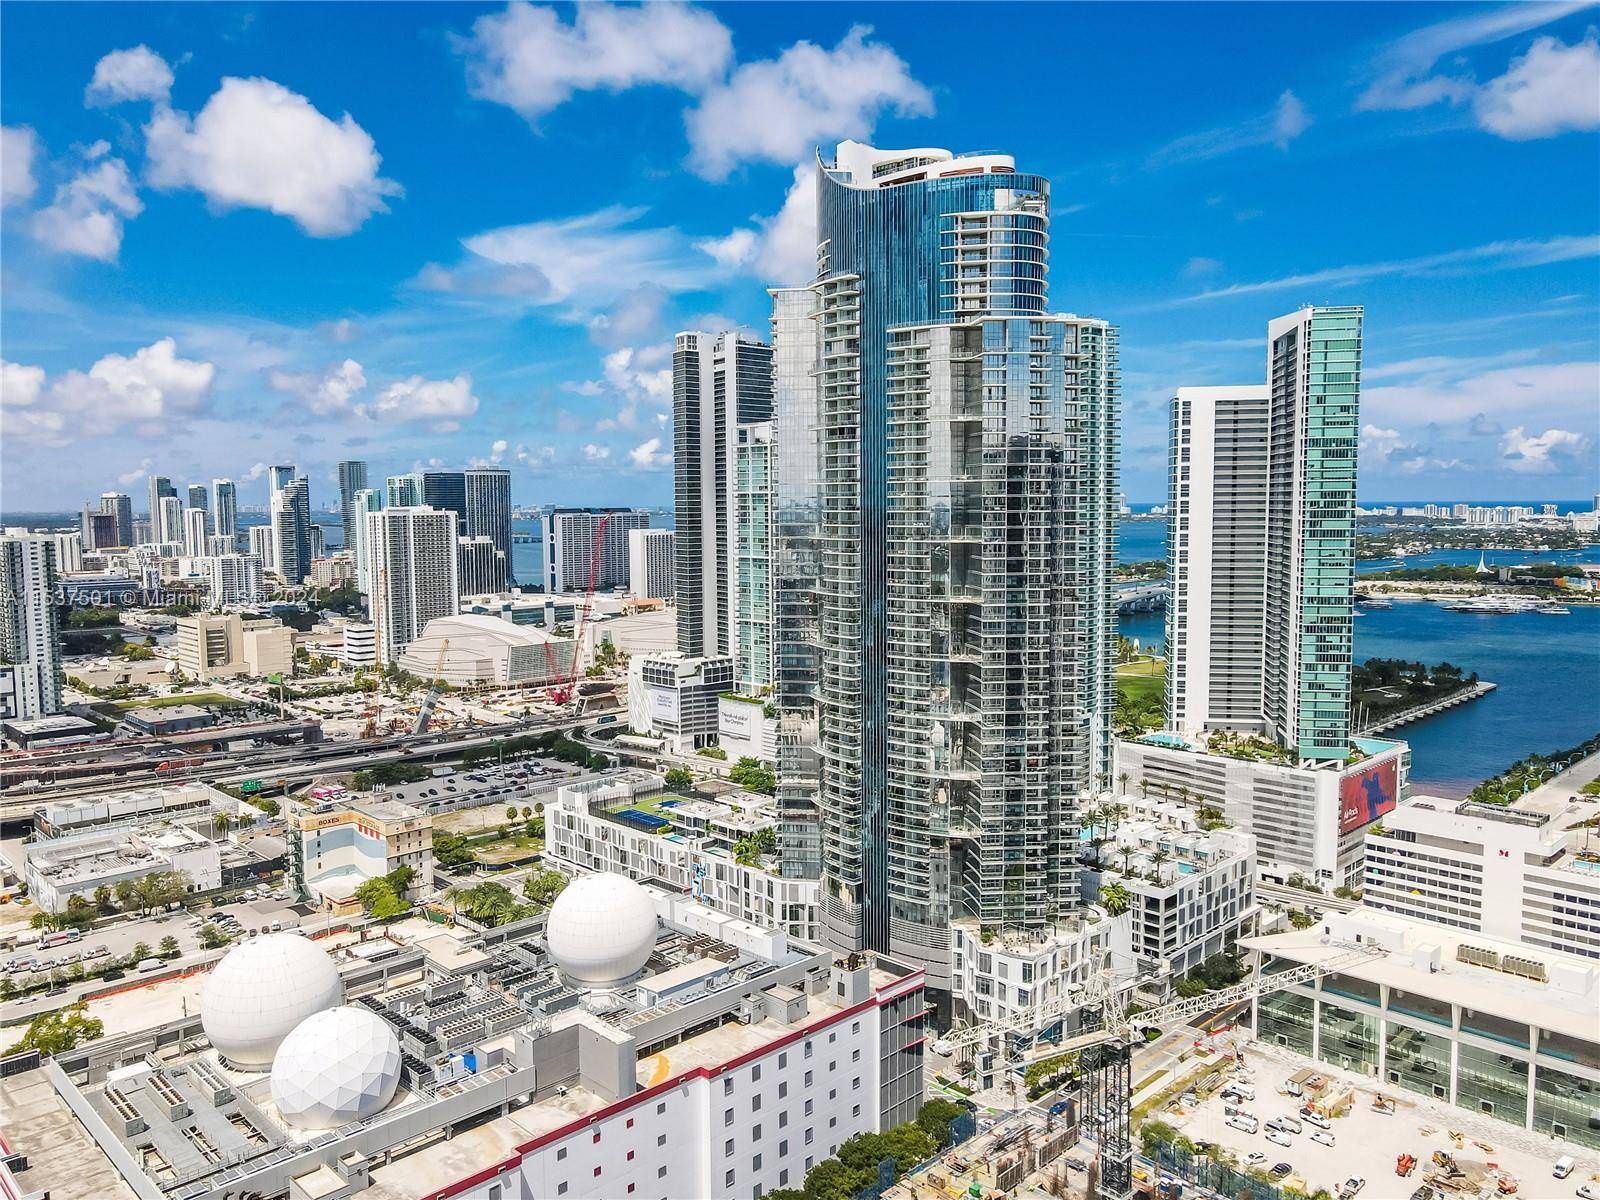 Welcome to urban luxury living at its finest in The Paramount, Miami.